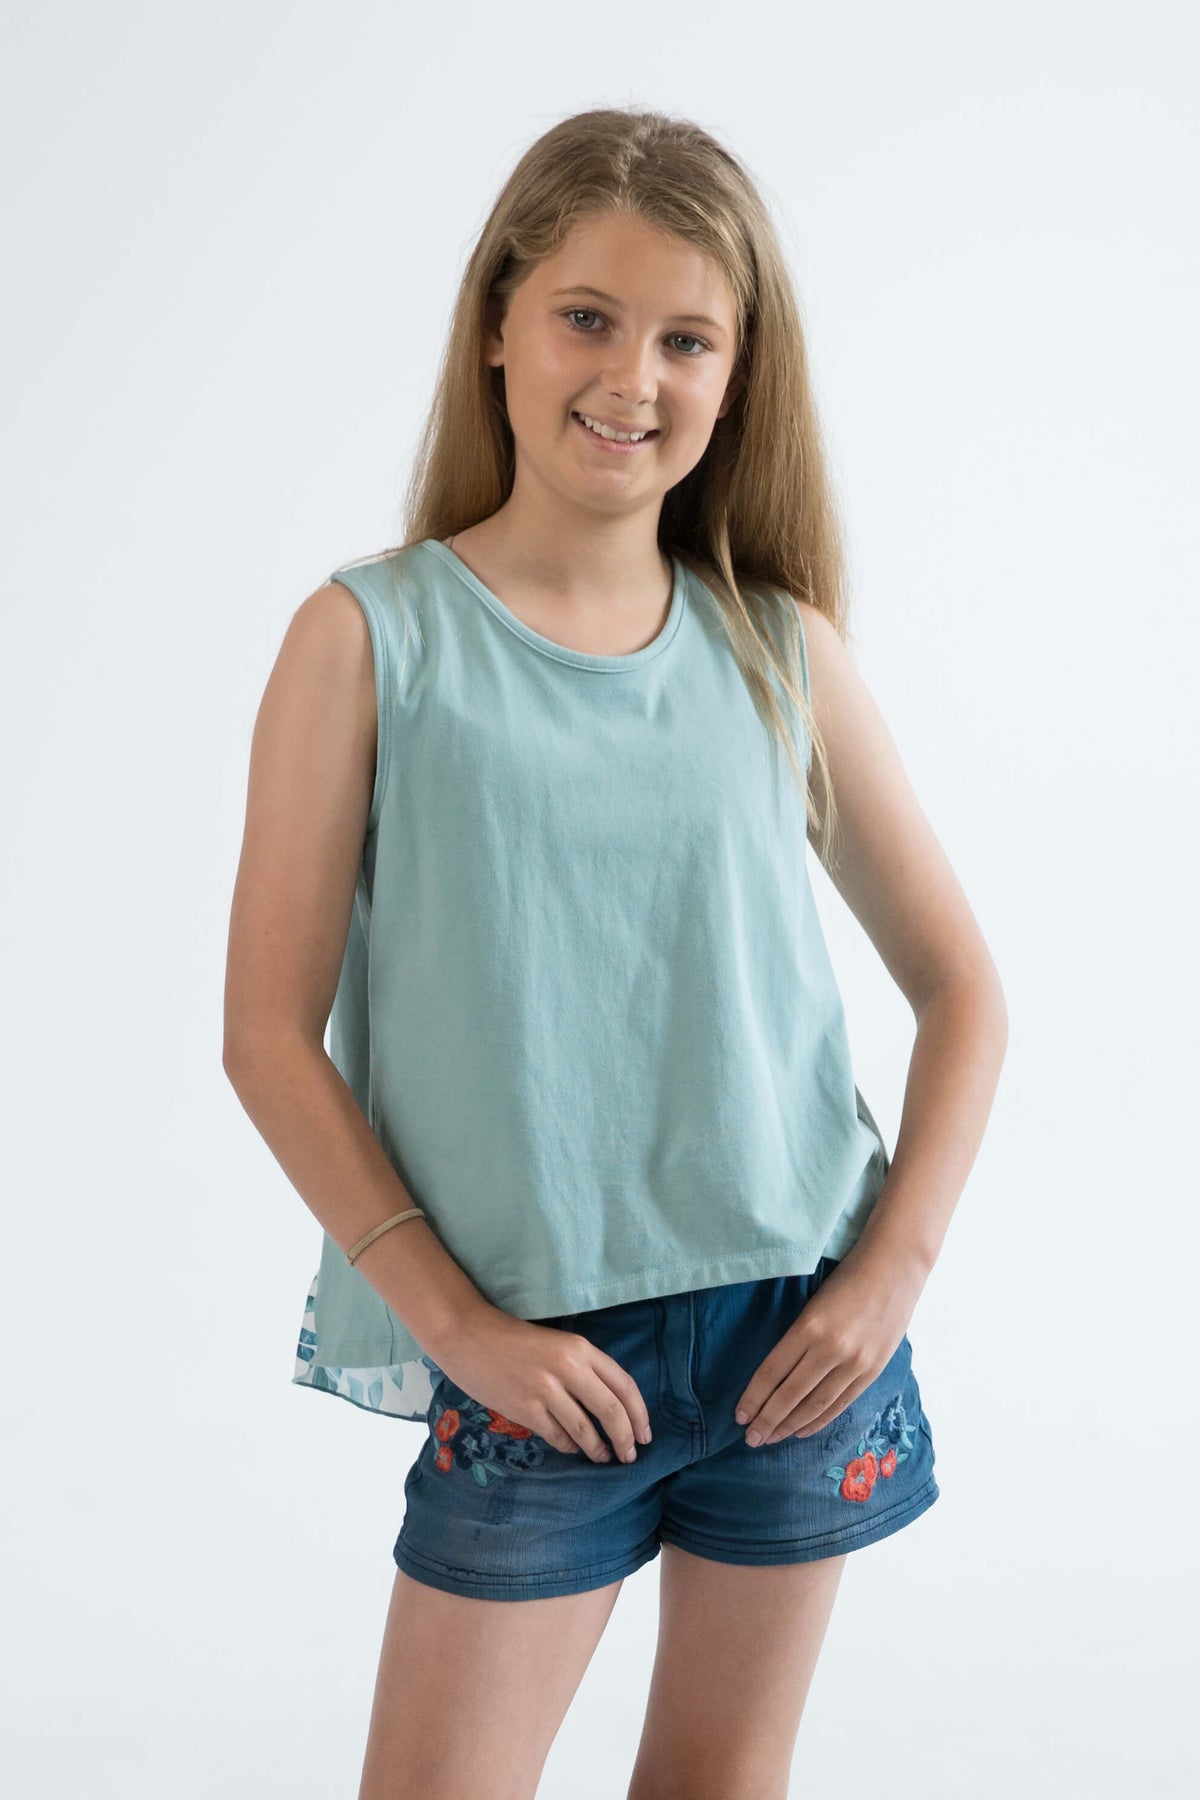 mint green teen girls clothing sleeveless singlet top floral print by Love Haidee Australia front